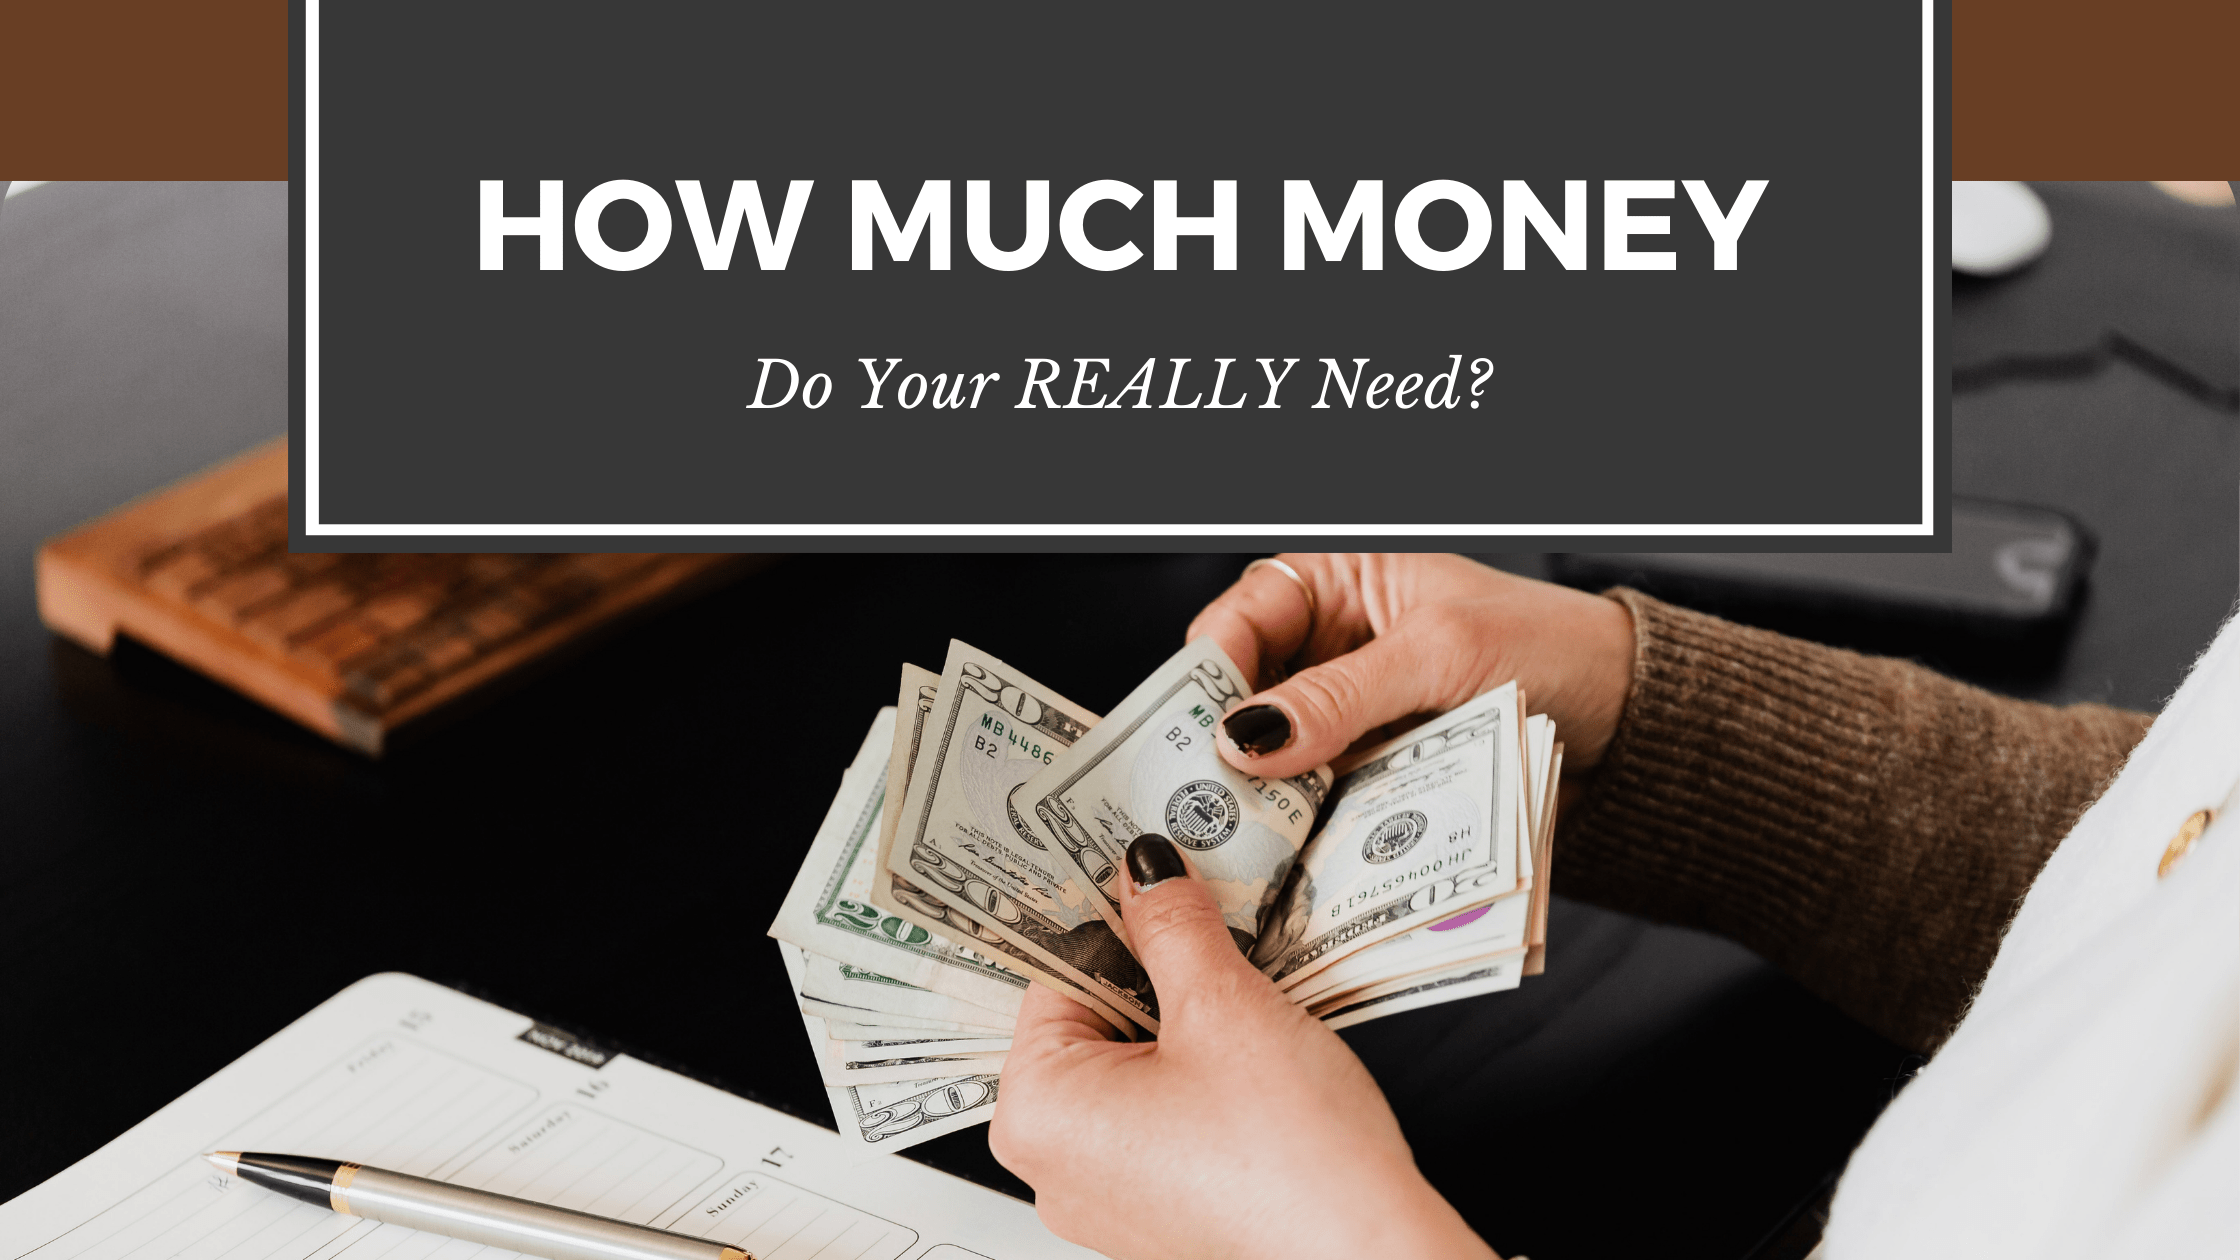 How Much Money Do You REALLY Need?